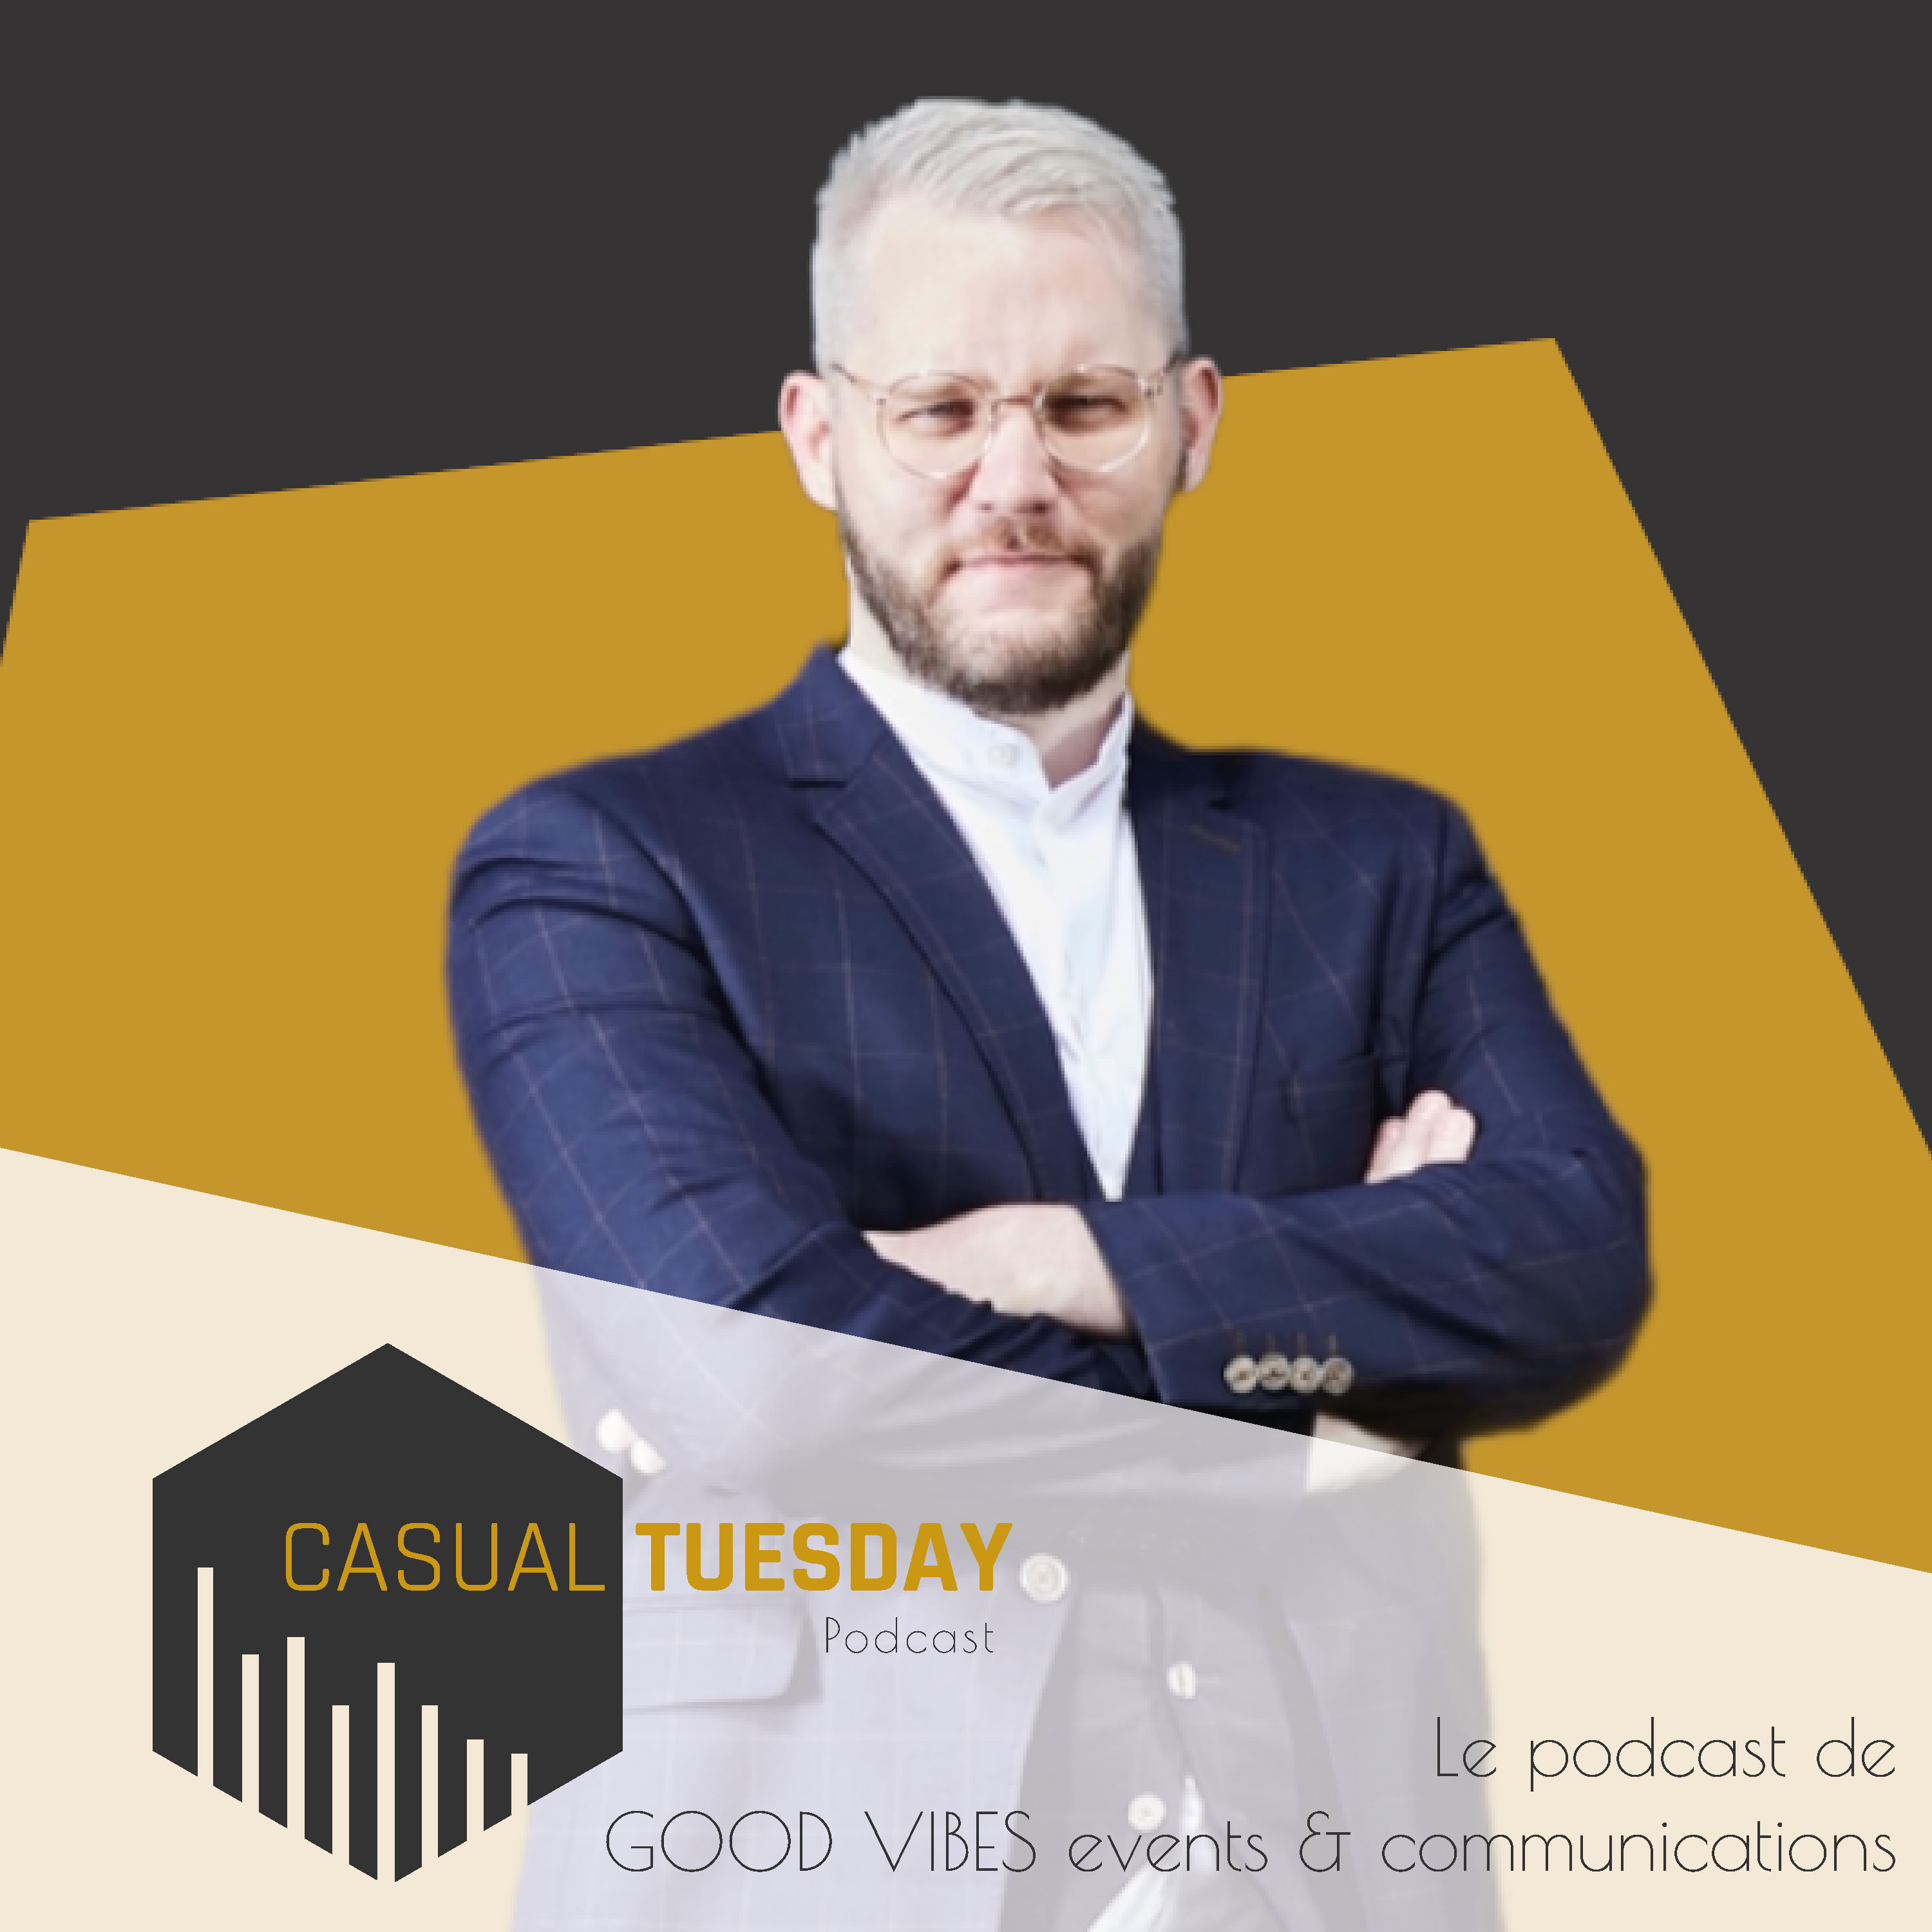 Artwork for podcast Casual Tuesday